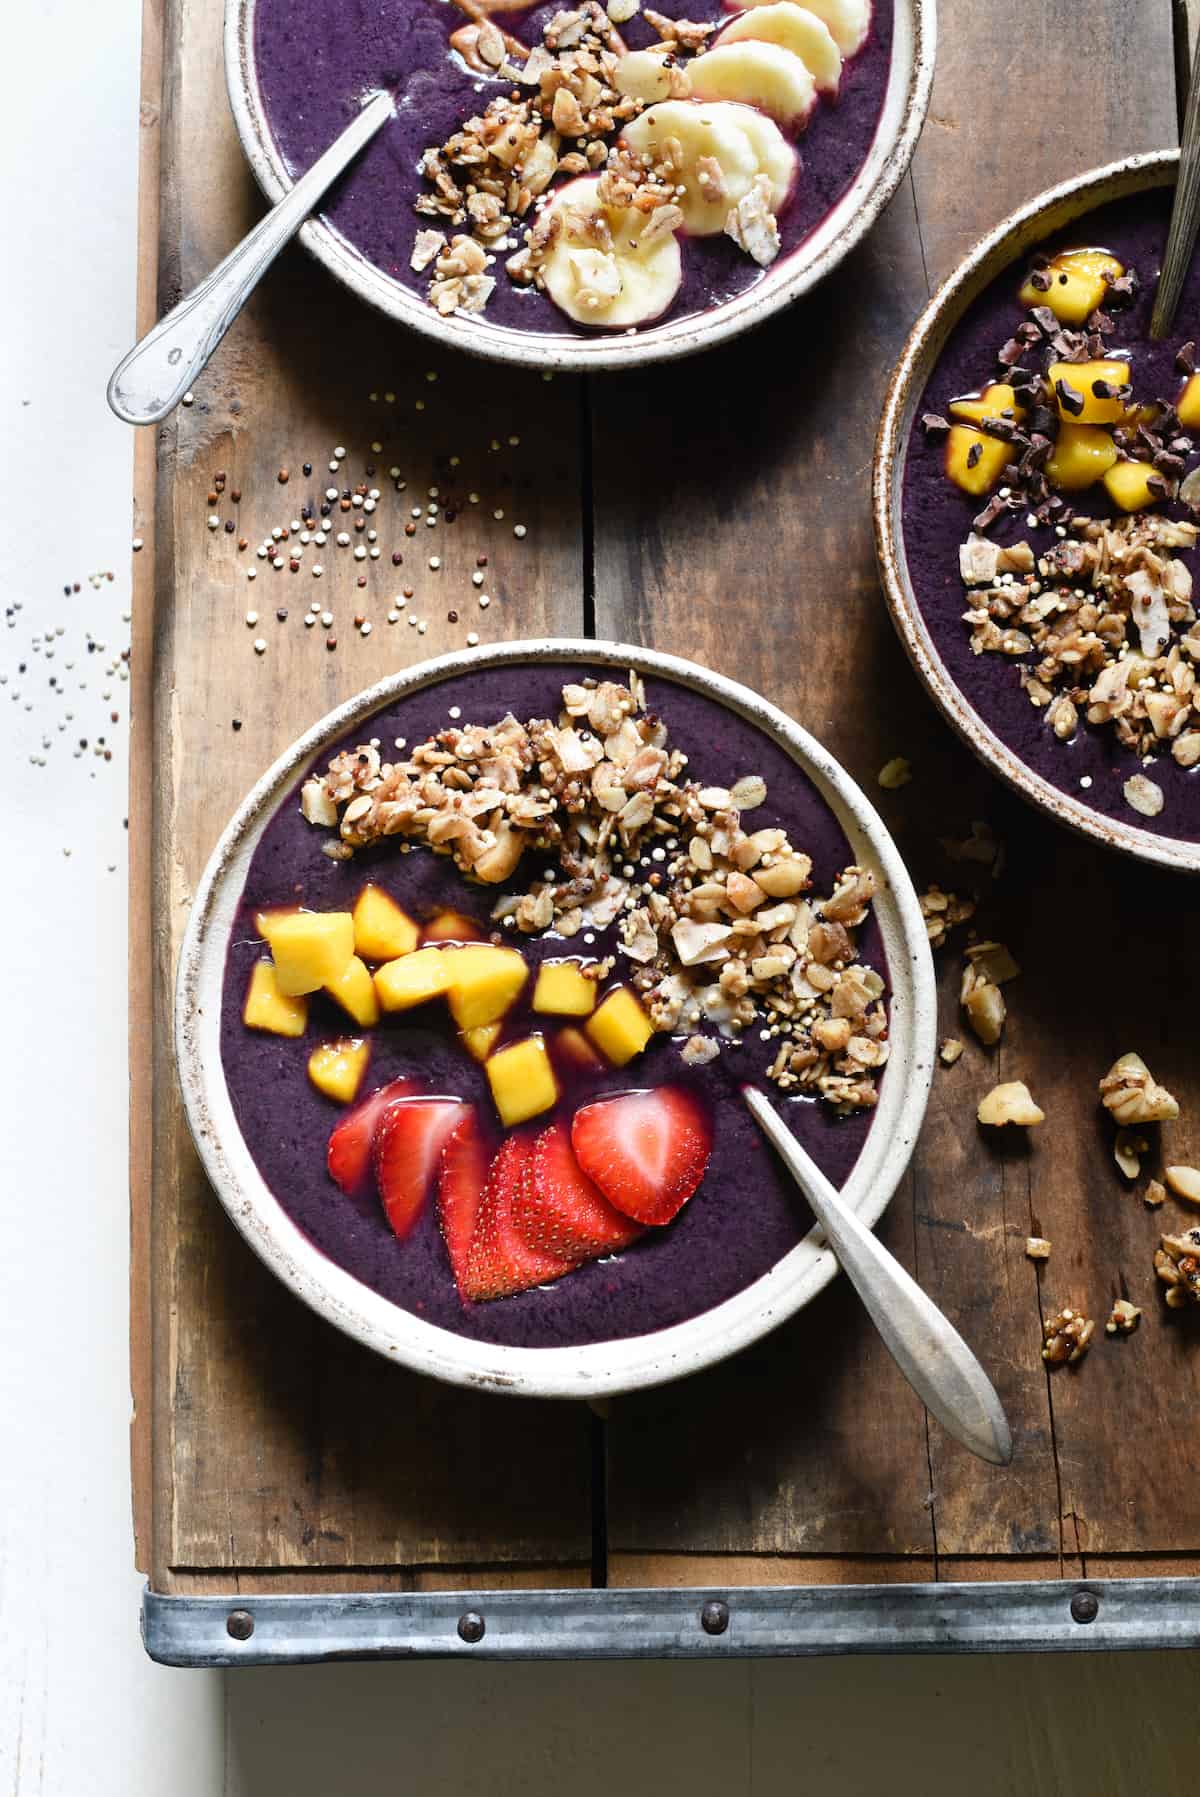 Get your day started with the powerful superfoods in these Açaí Bowls with Maple Quinoa Granola! Berry and banana smoothie bowls are topped with easy homemade granola, fresh fruit and almond butter. Naturally gluten free and vegan. | foxeslovelemons.com